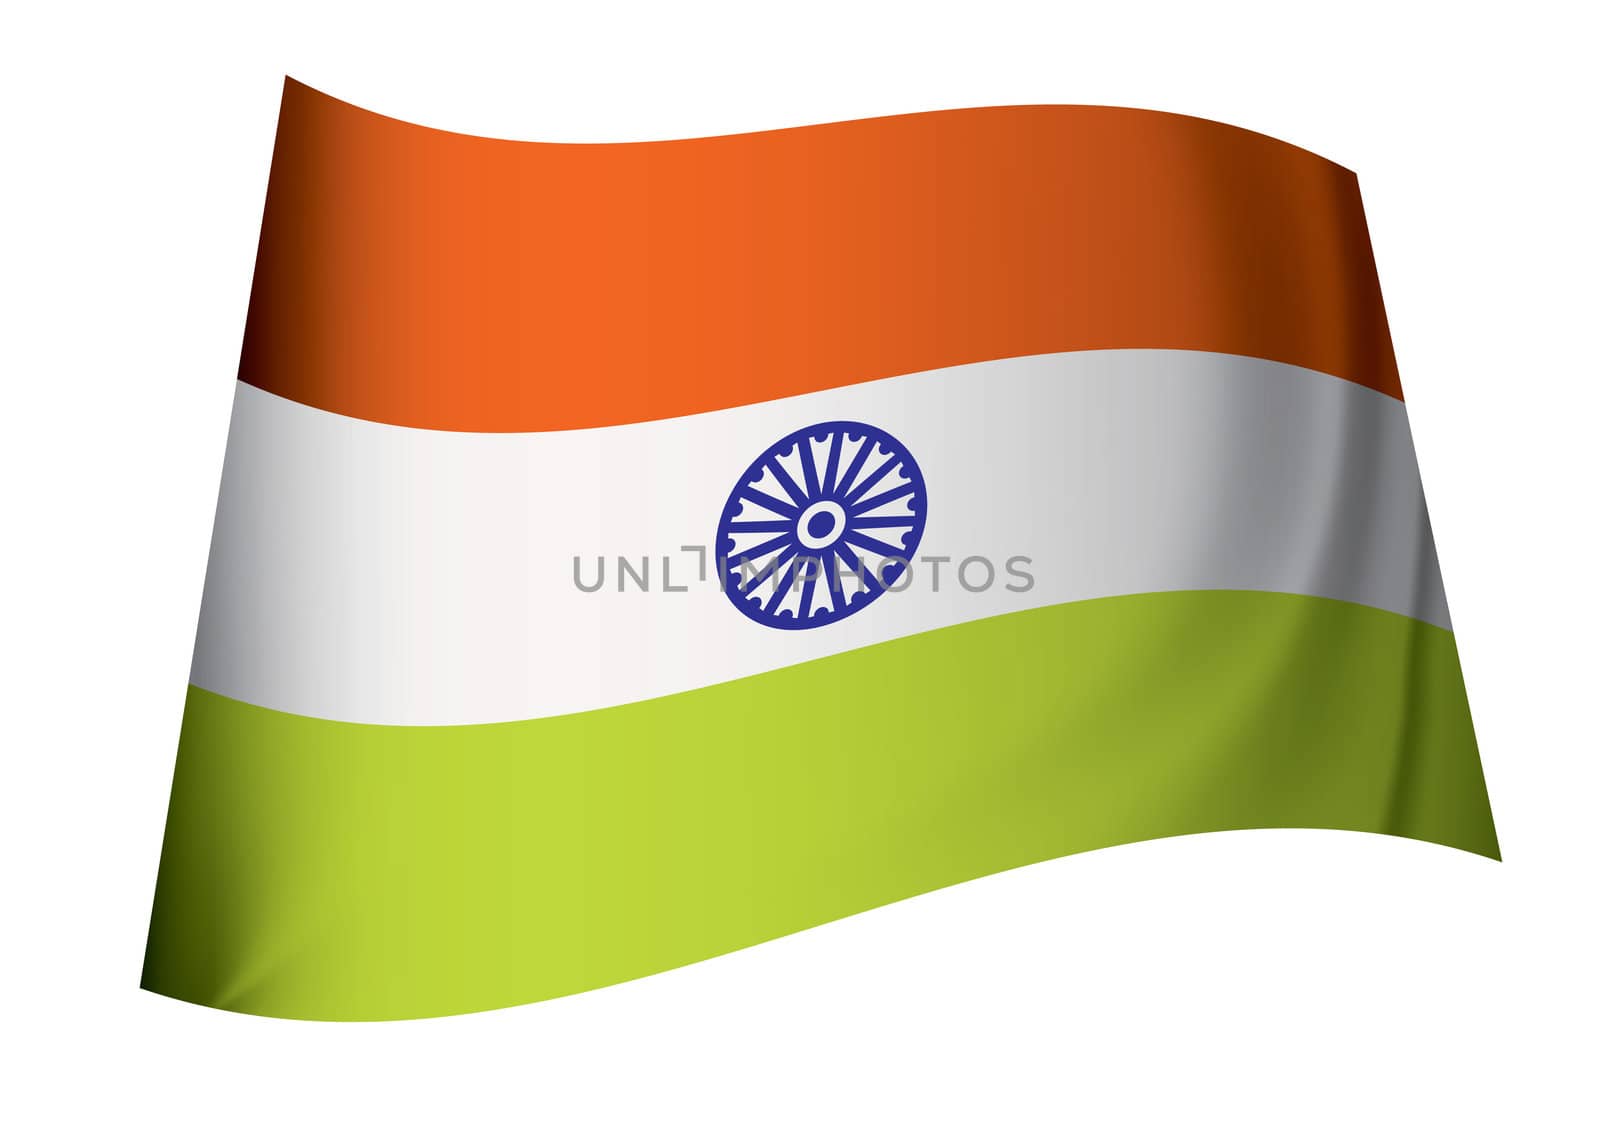 Indian flag icon with orange and green stripes floating in the wind